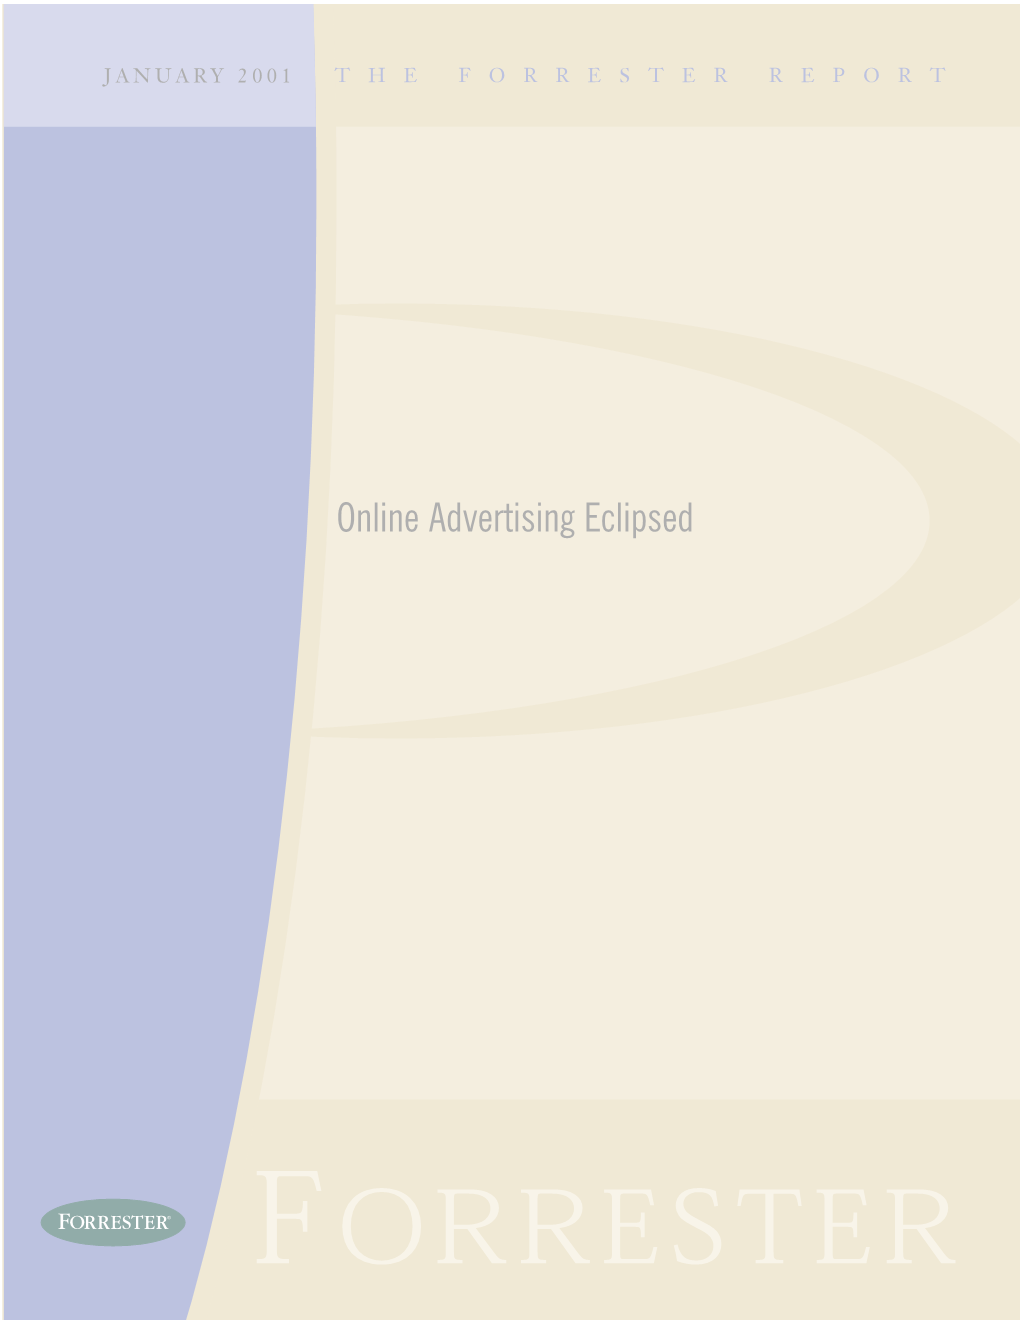 Online Advertising Eclipsed the Forrester Report